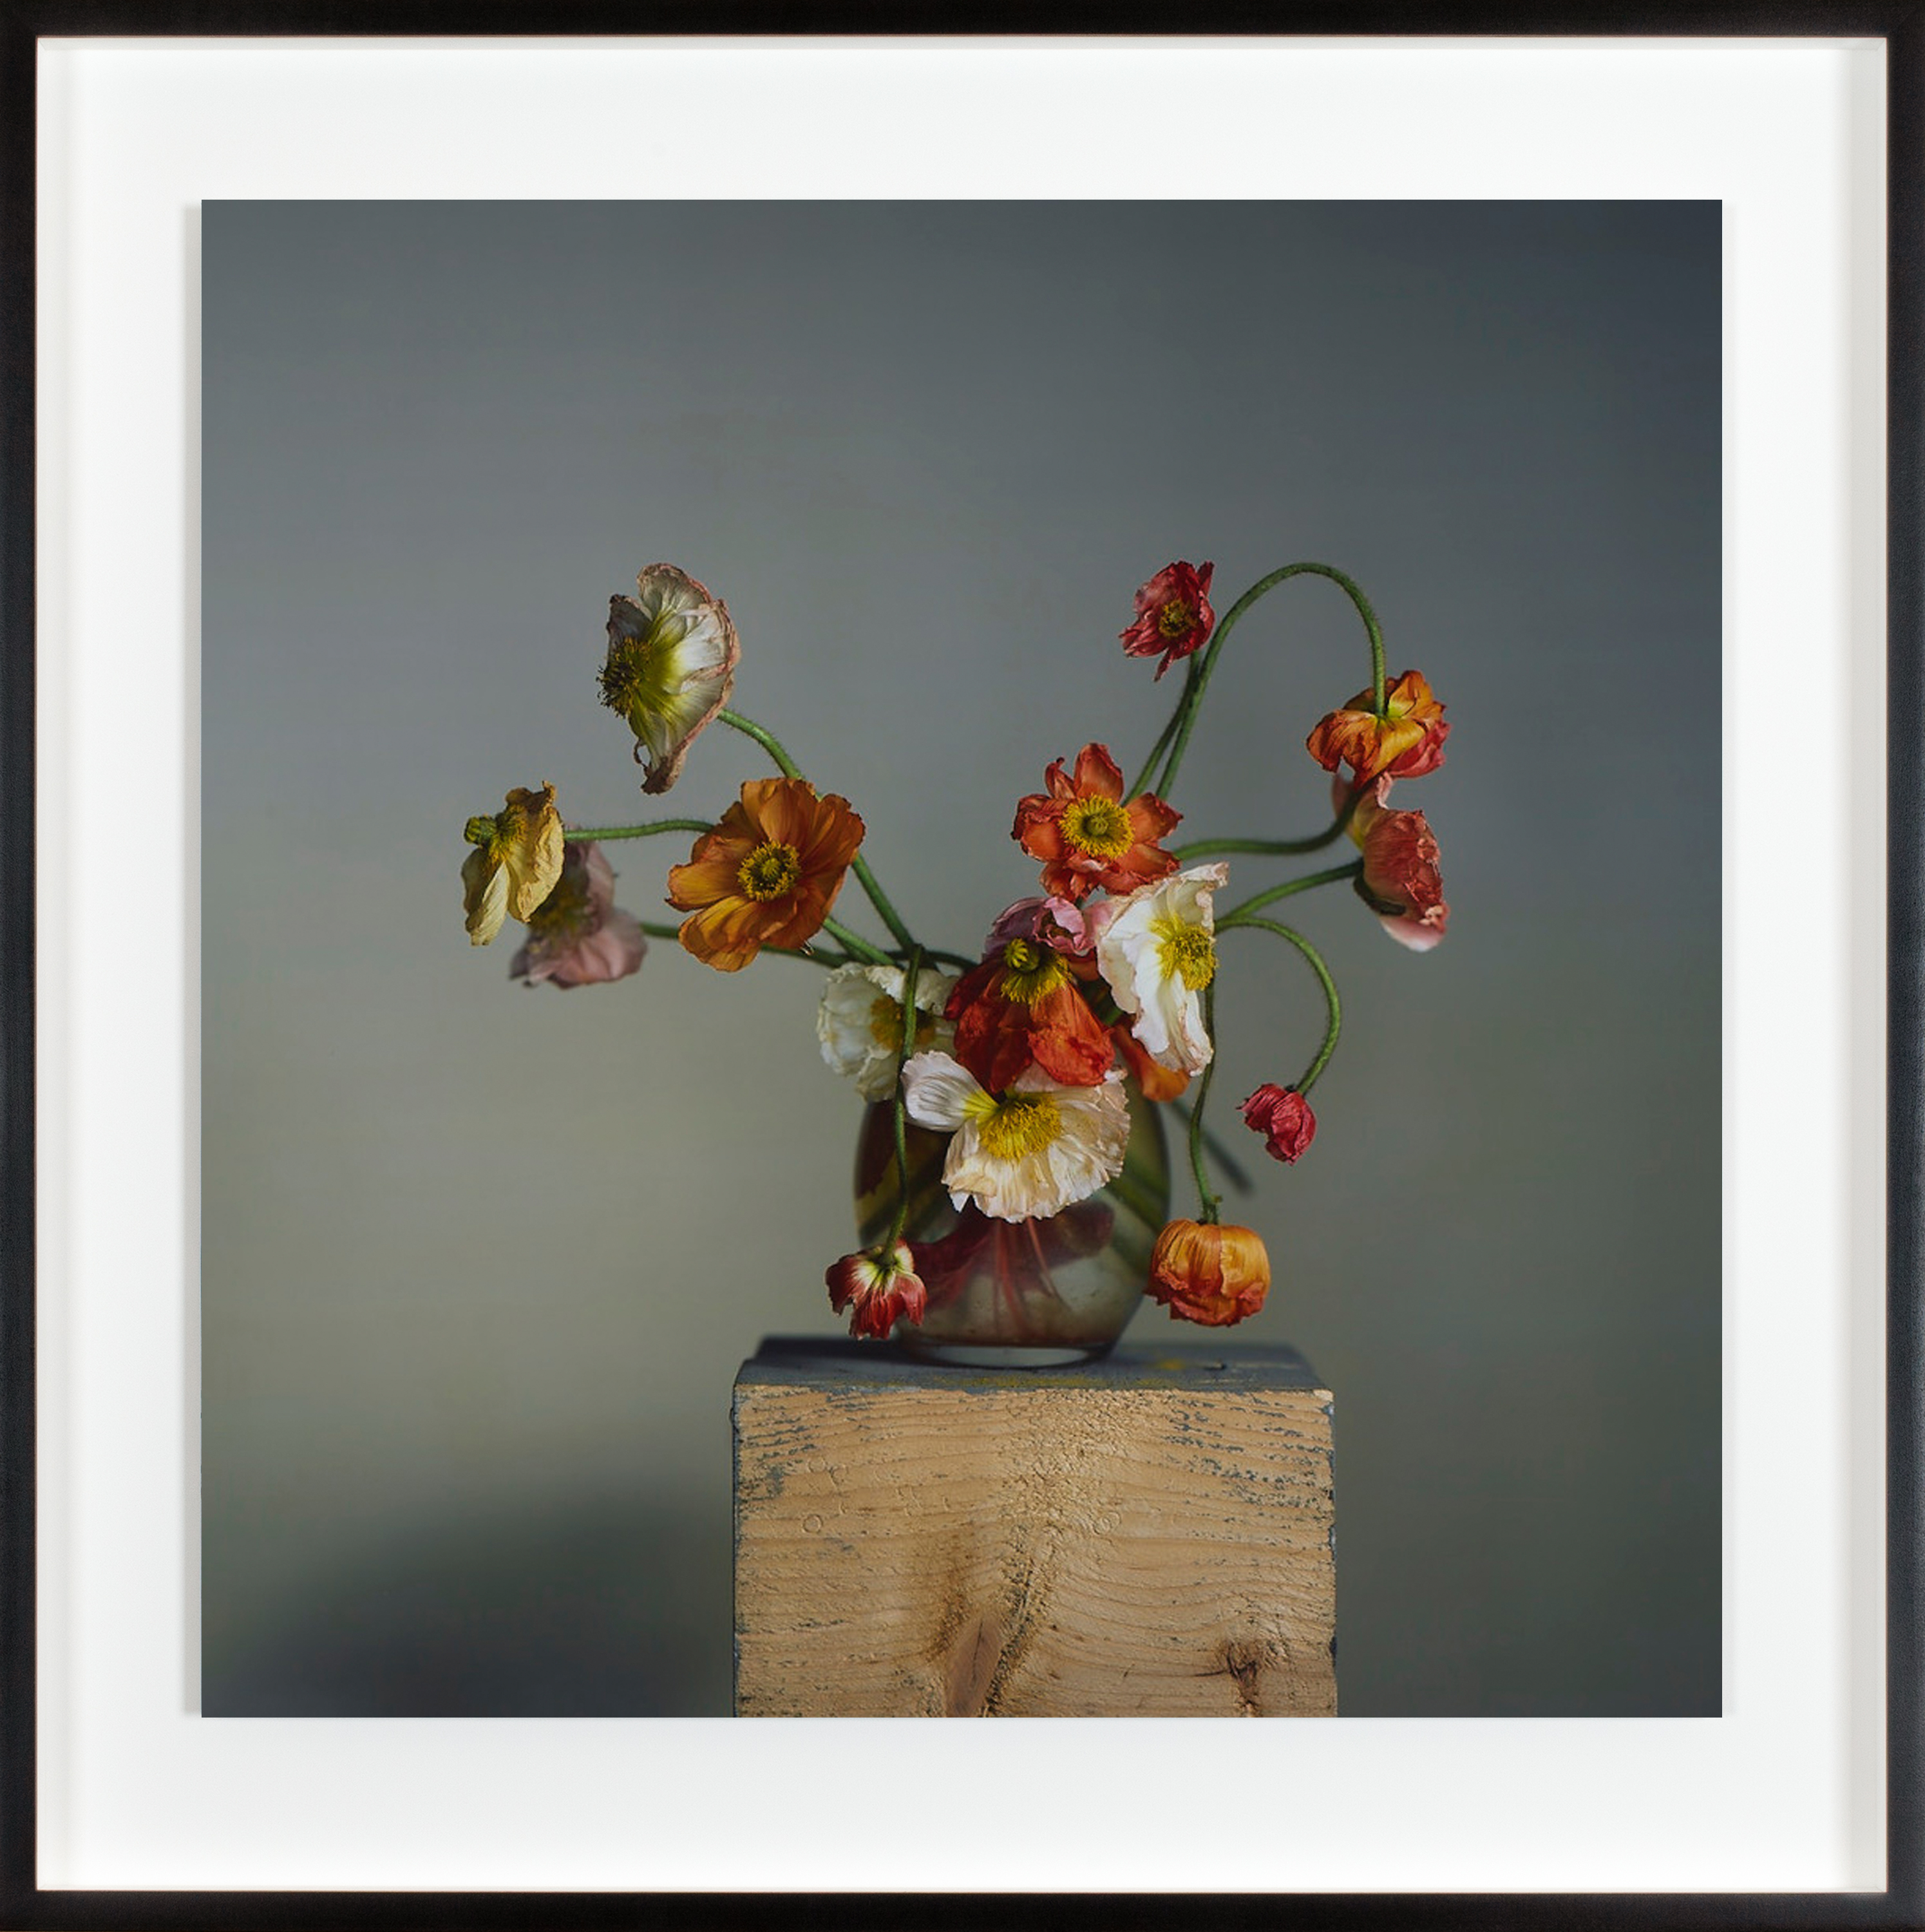 Color photograph of flowers at various stages of decay in a glass vase on a wooden plinth